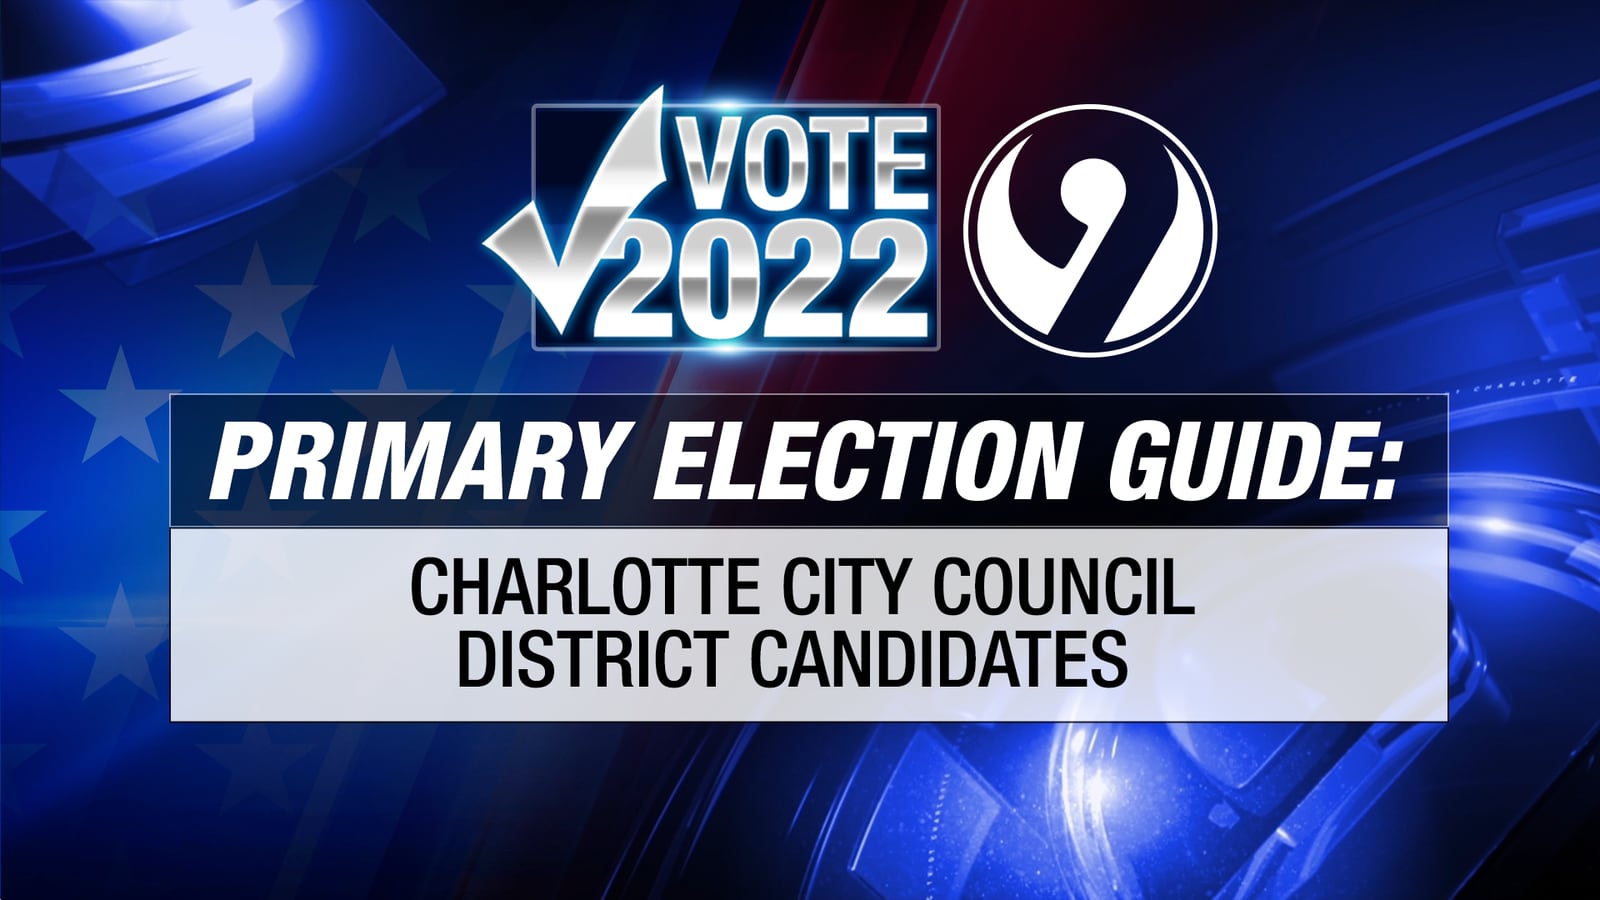 Channel 9 Primary Election Guide Charlotte City Council district